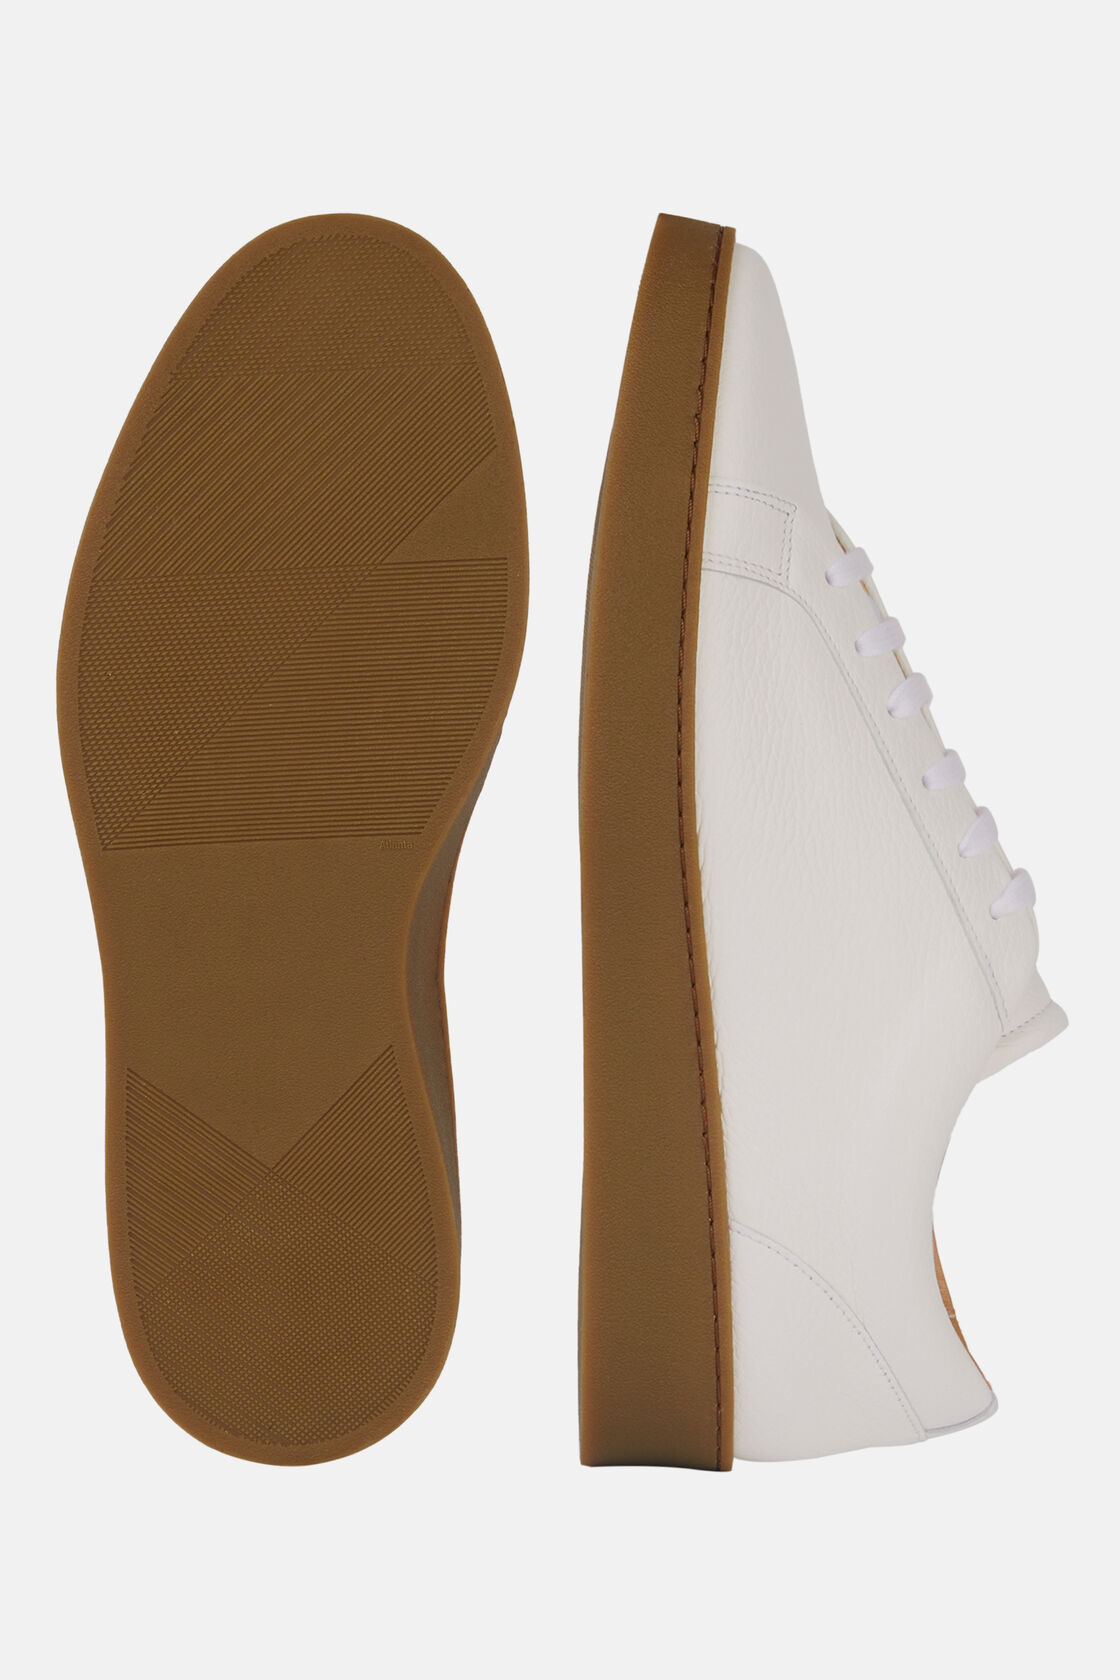 White Tumbled Leather Trainers, White, hi-res